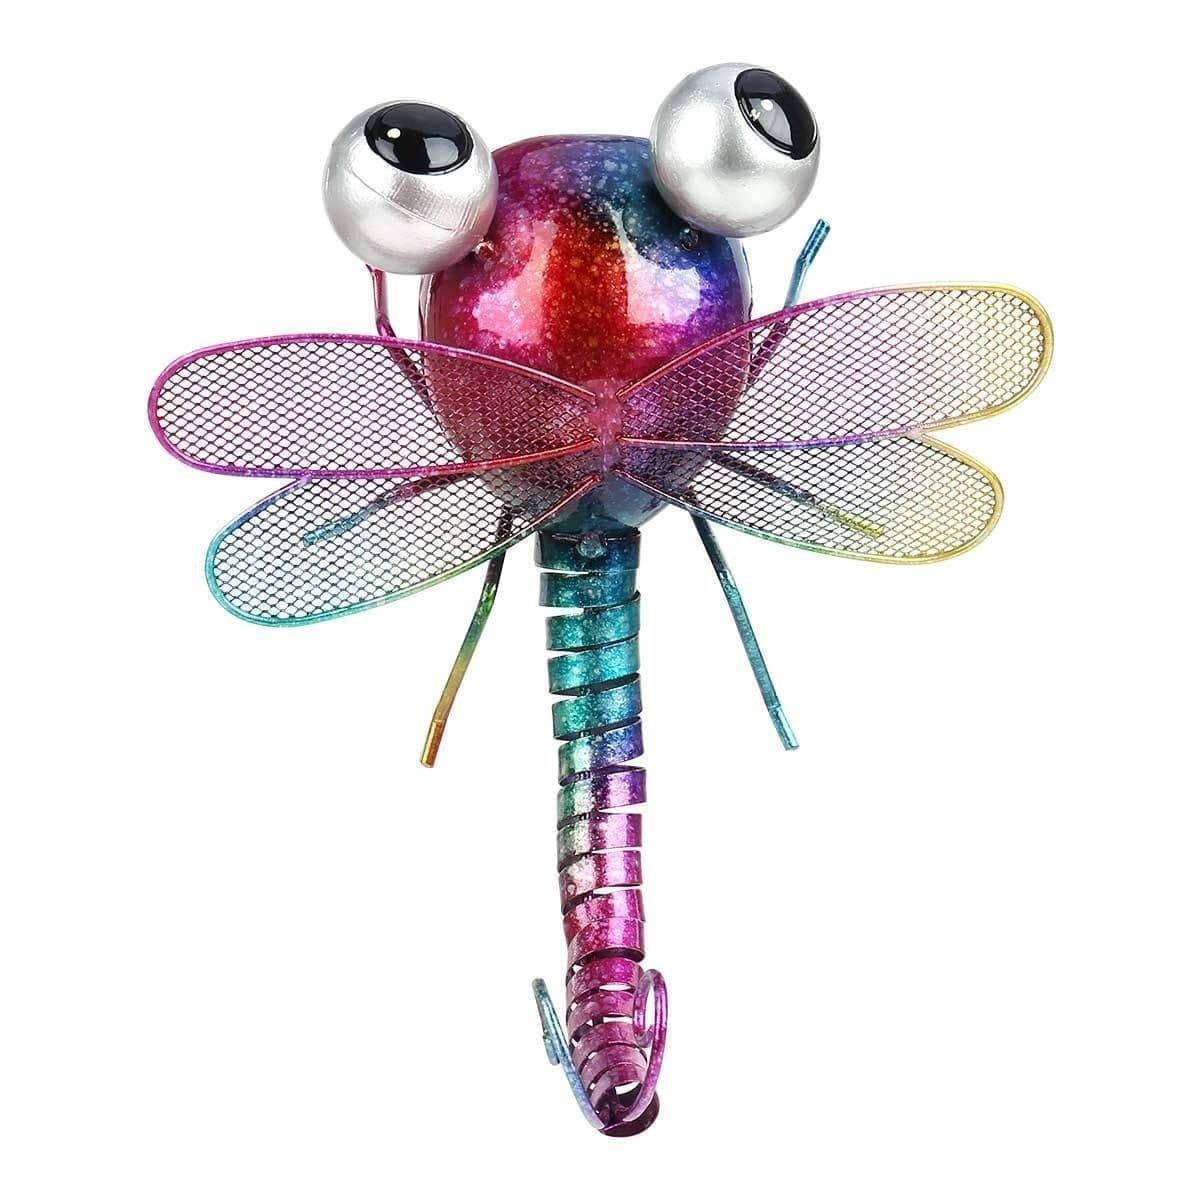 Iron Dragonfly Wall Decoration - Cartoon-Inspired & Playful